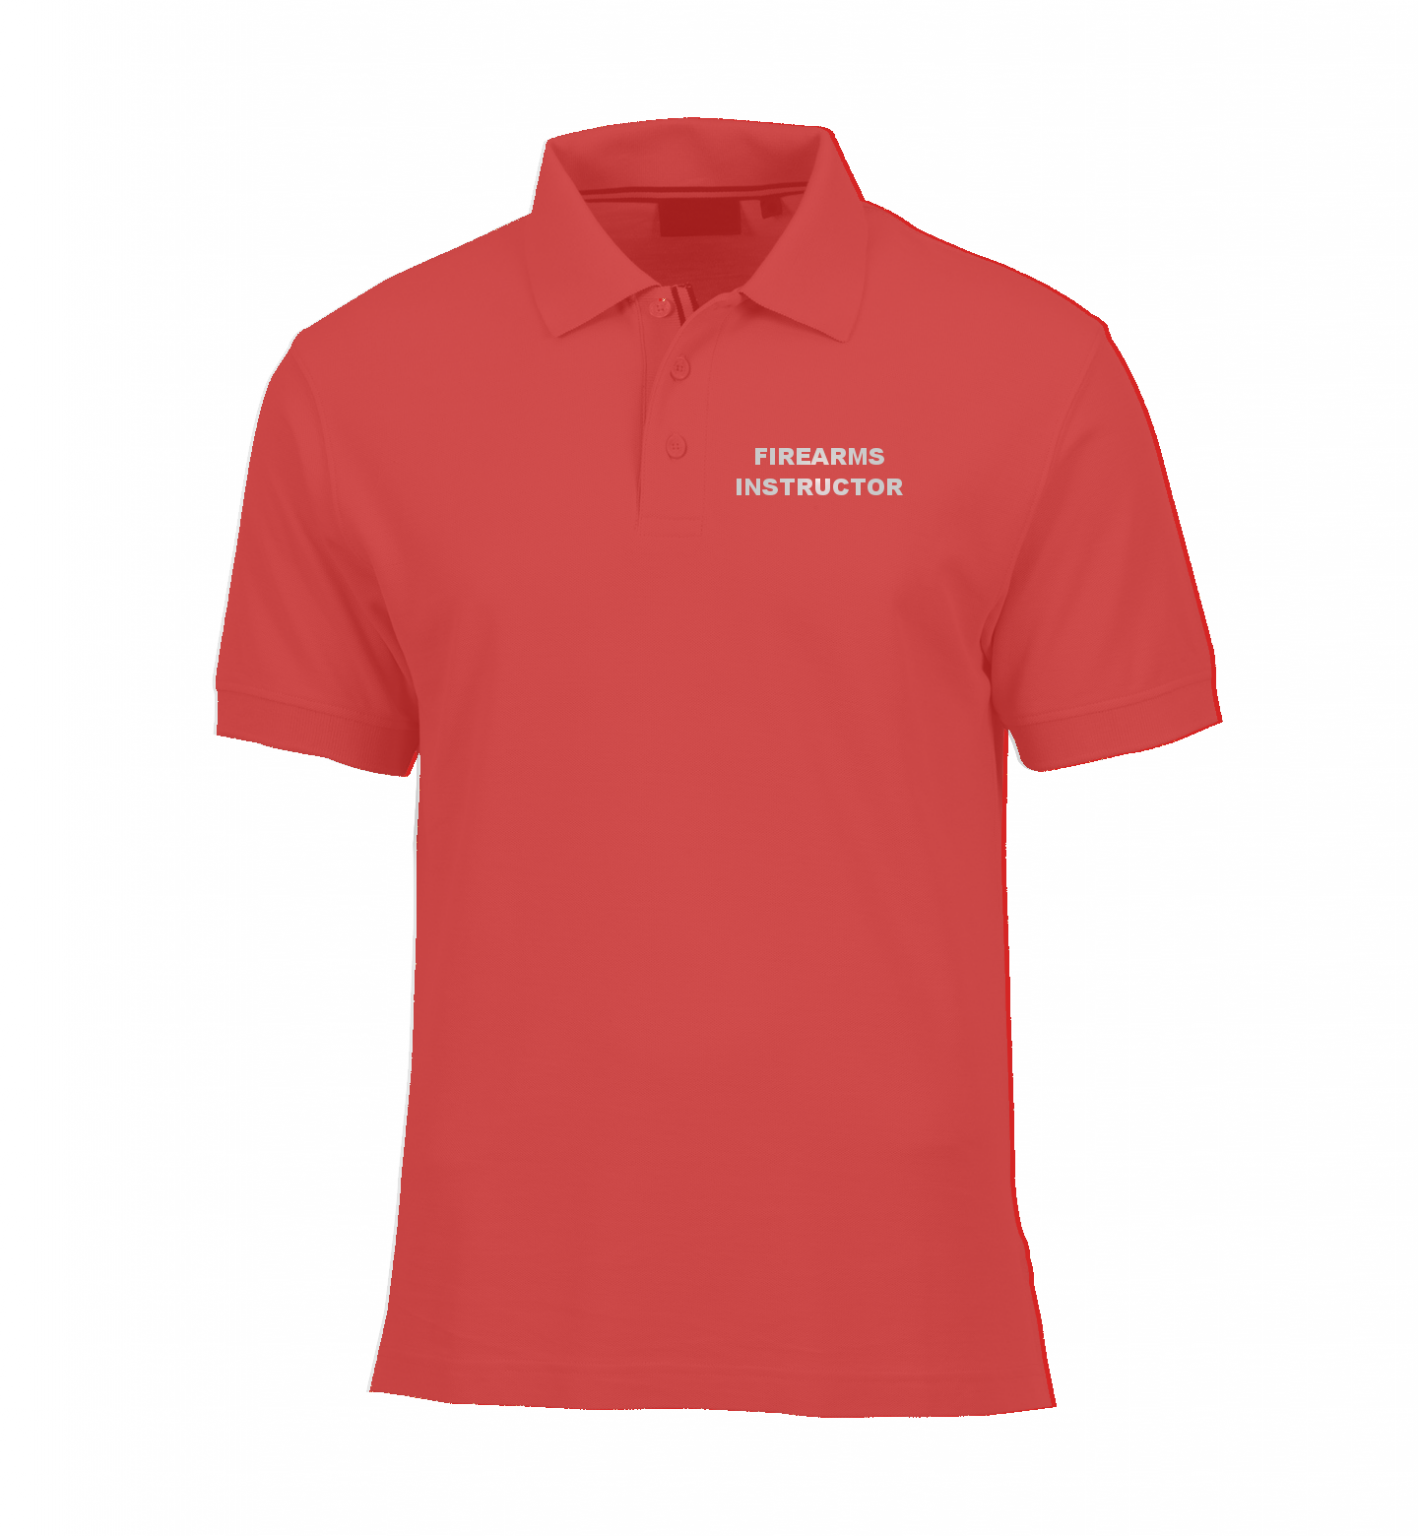 Firearms Instructor Polo Shirt | Milspec Tees Store